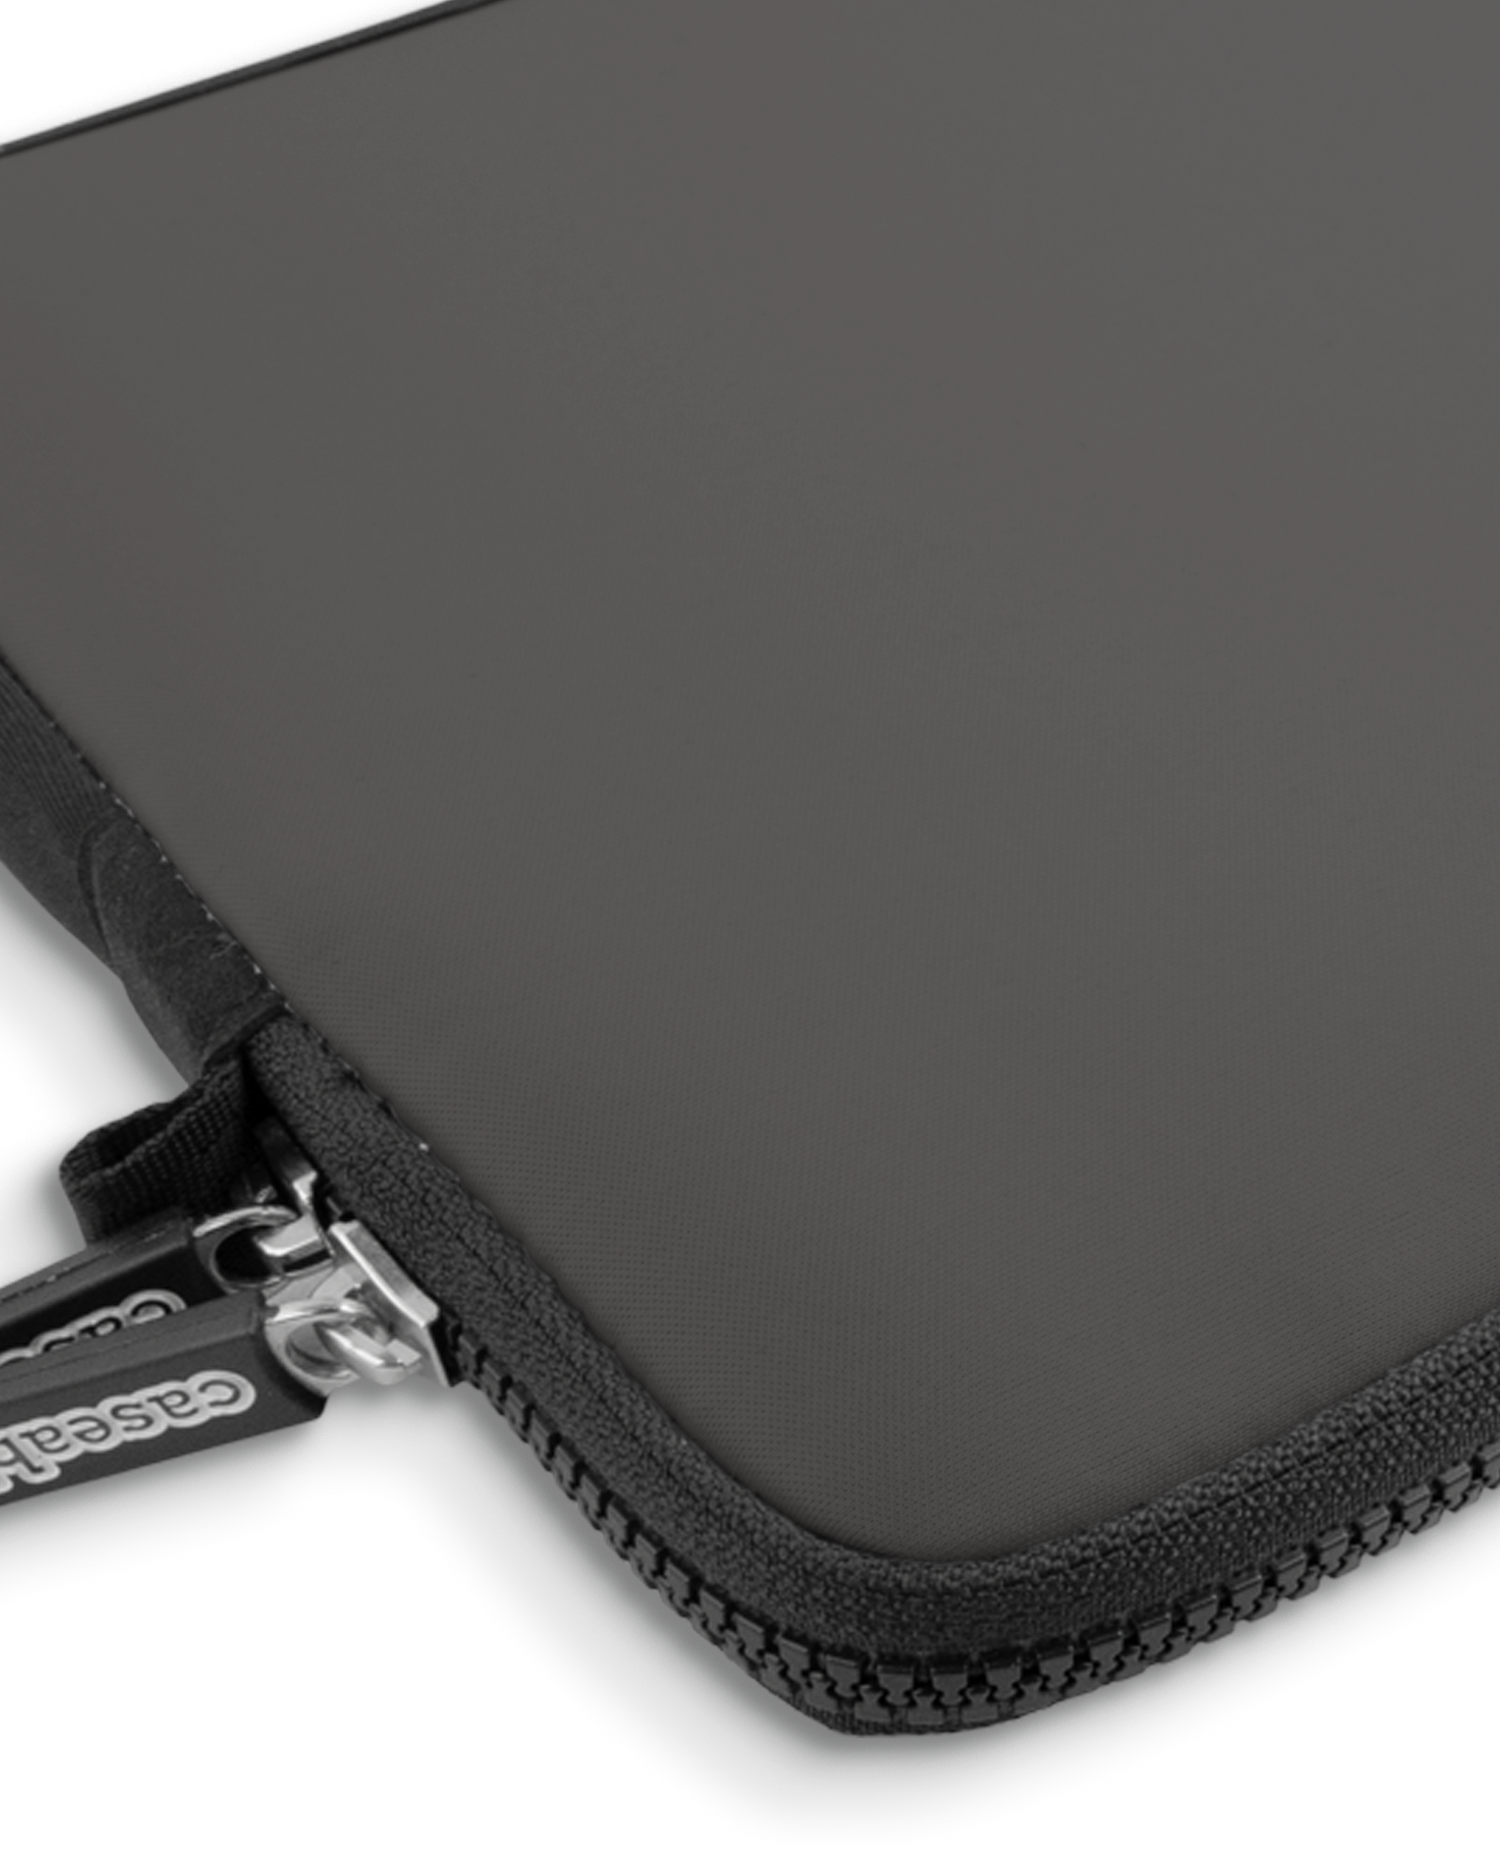 SPACE GREY Premium Laptop Bag 13 inch with device inside